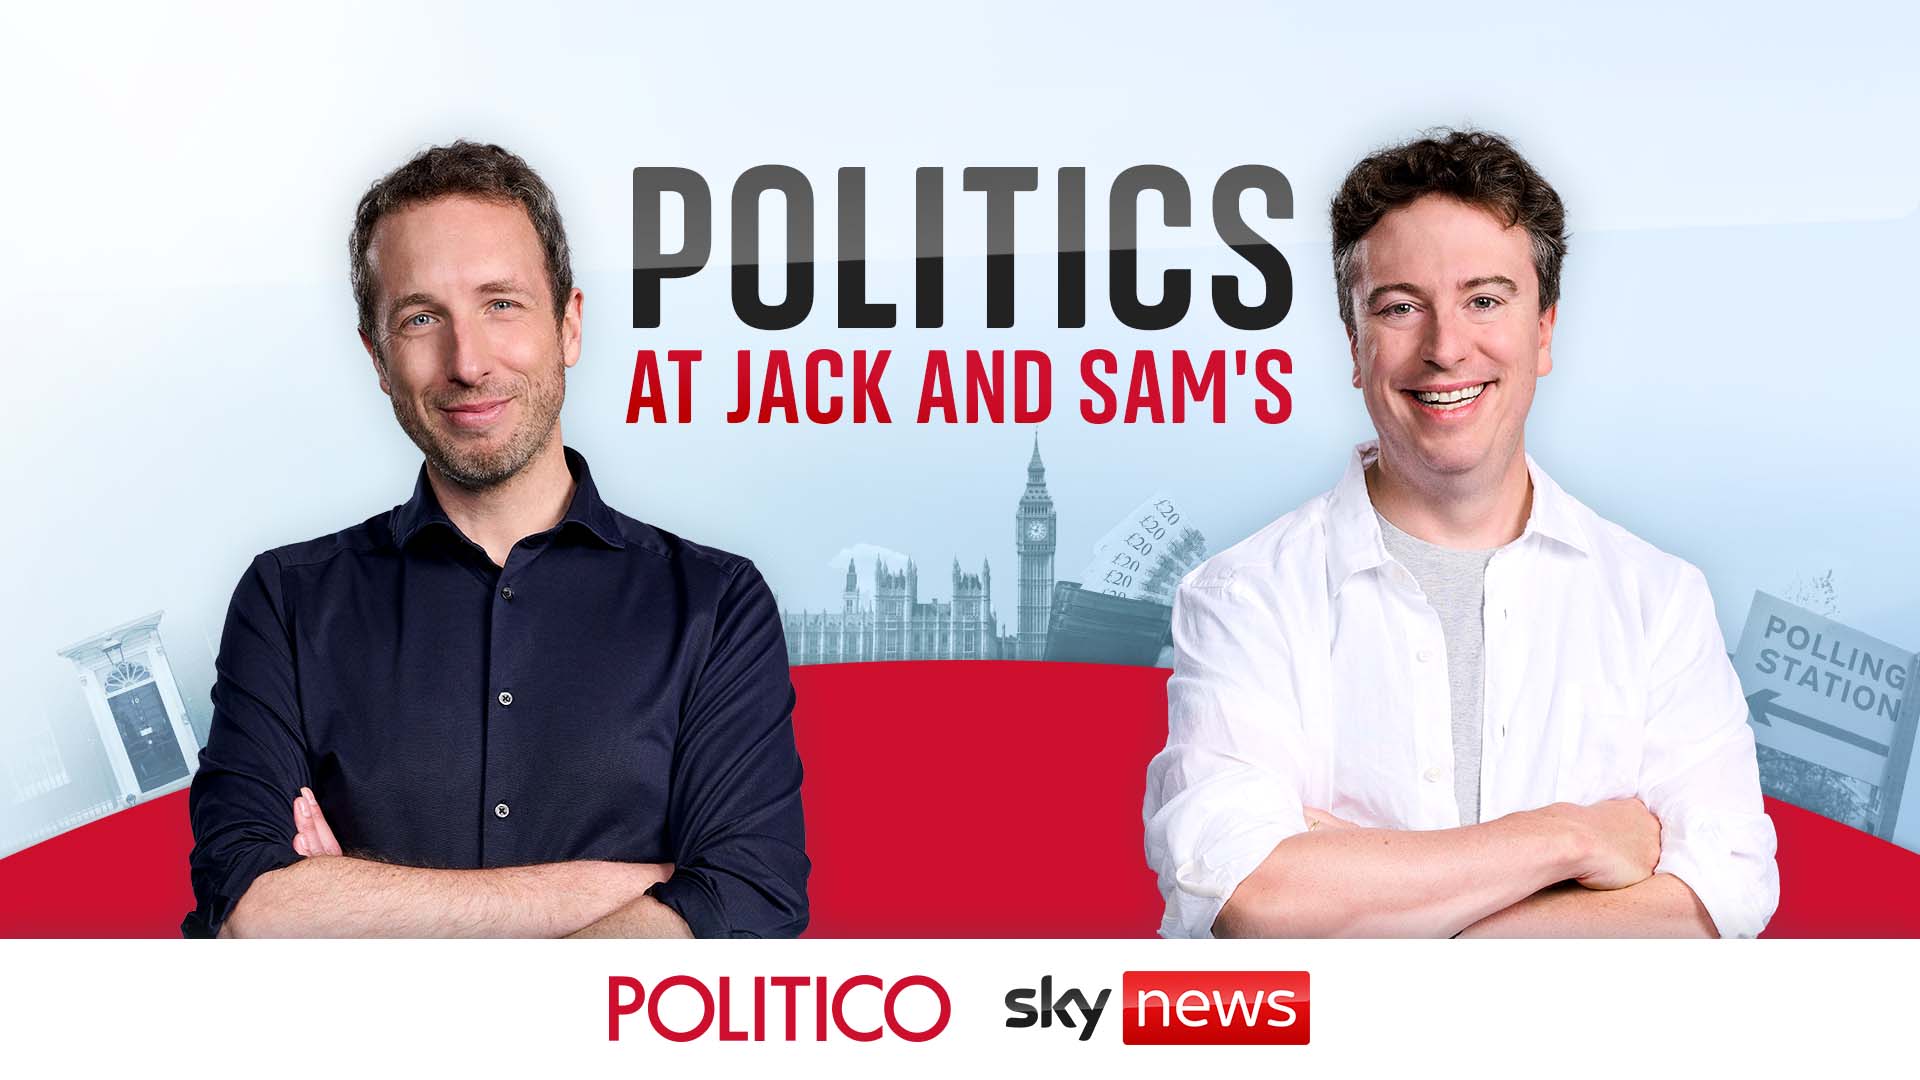 POLITICO and Sky News launch new weekly podcast Politics at Jack and Sam’s